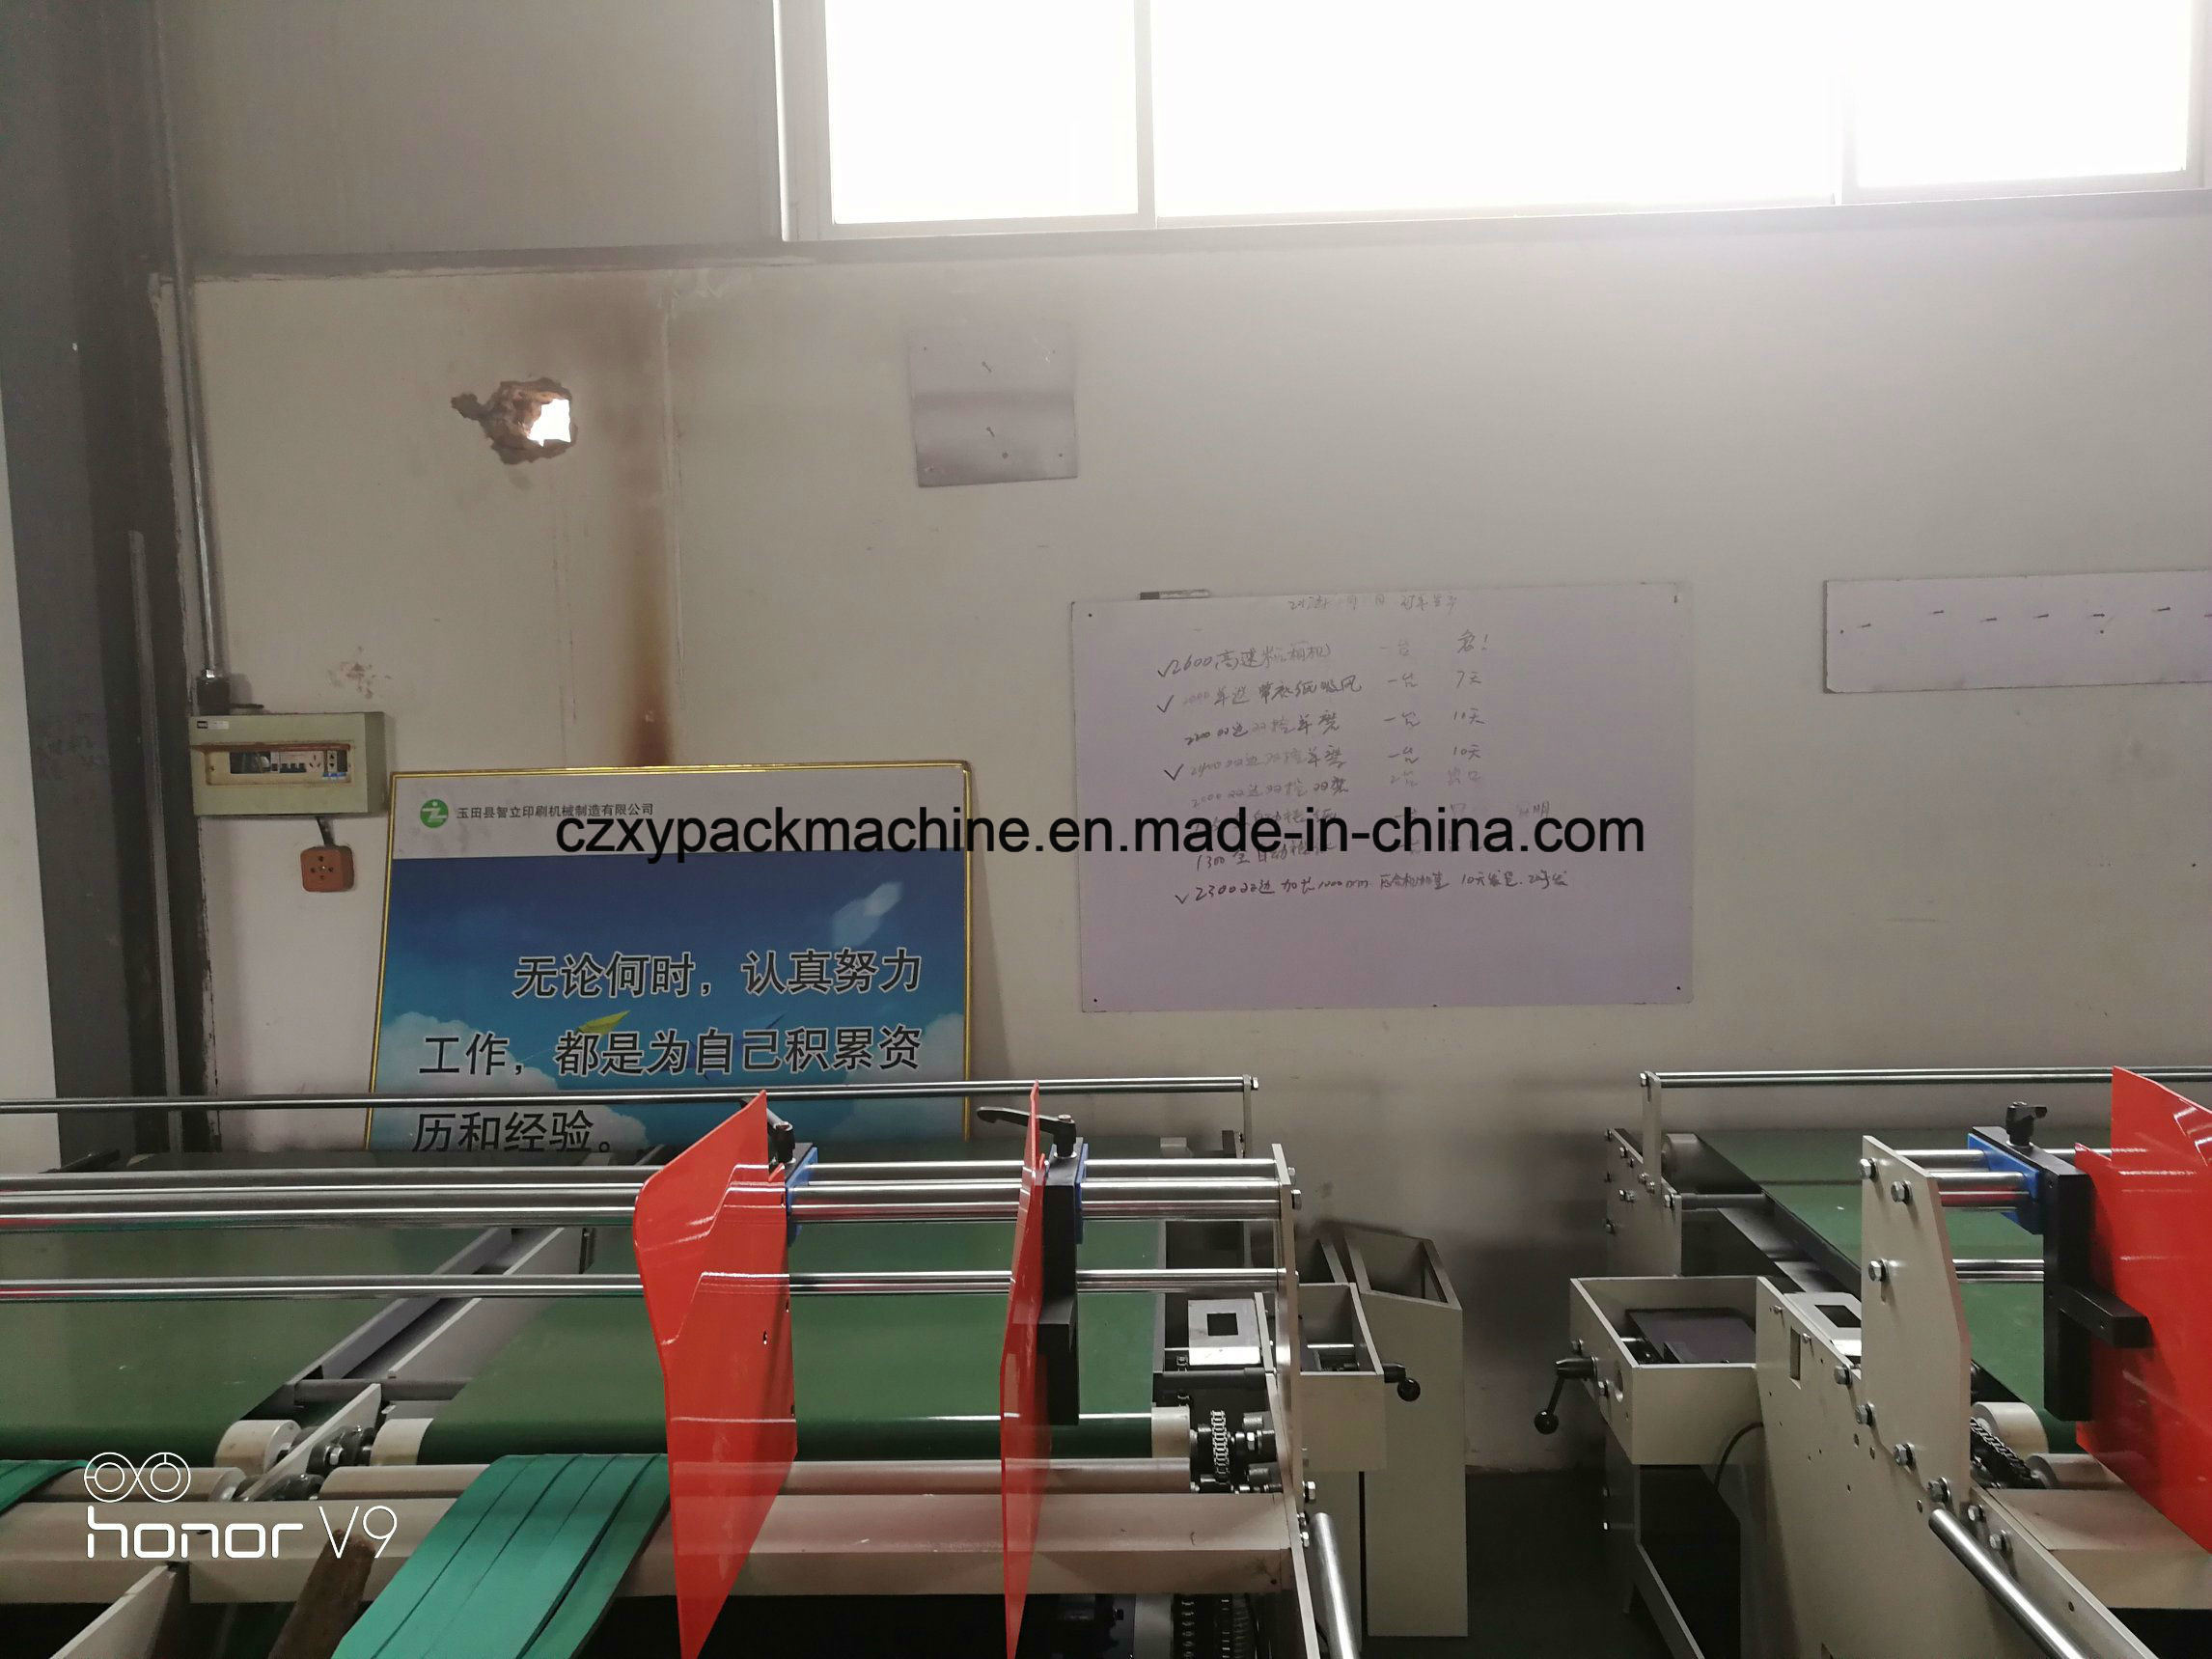 Find Good Price of Paper Laminating Machine From China